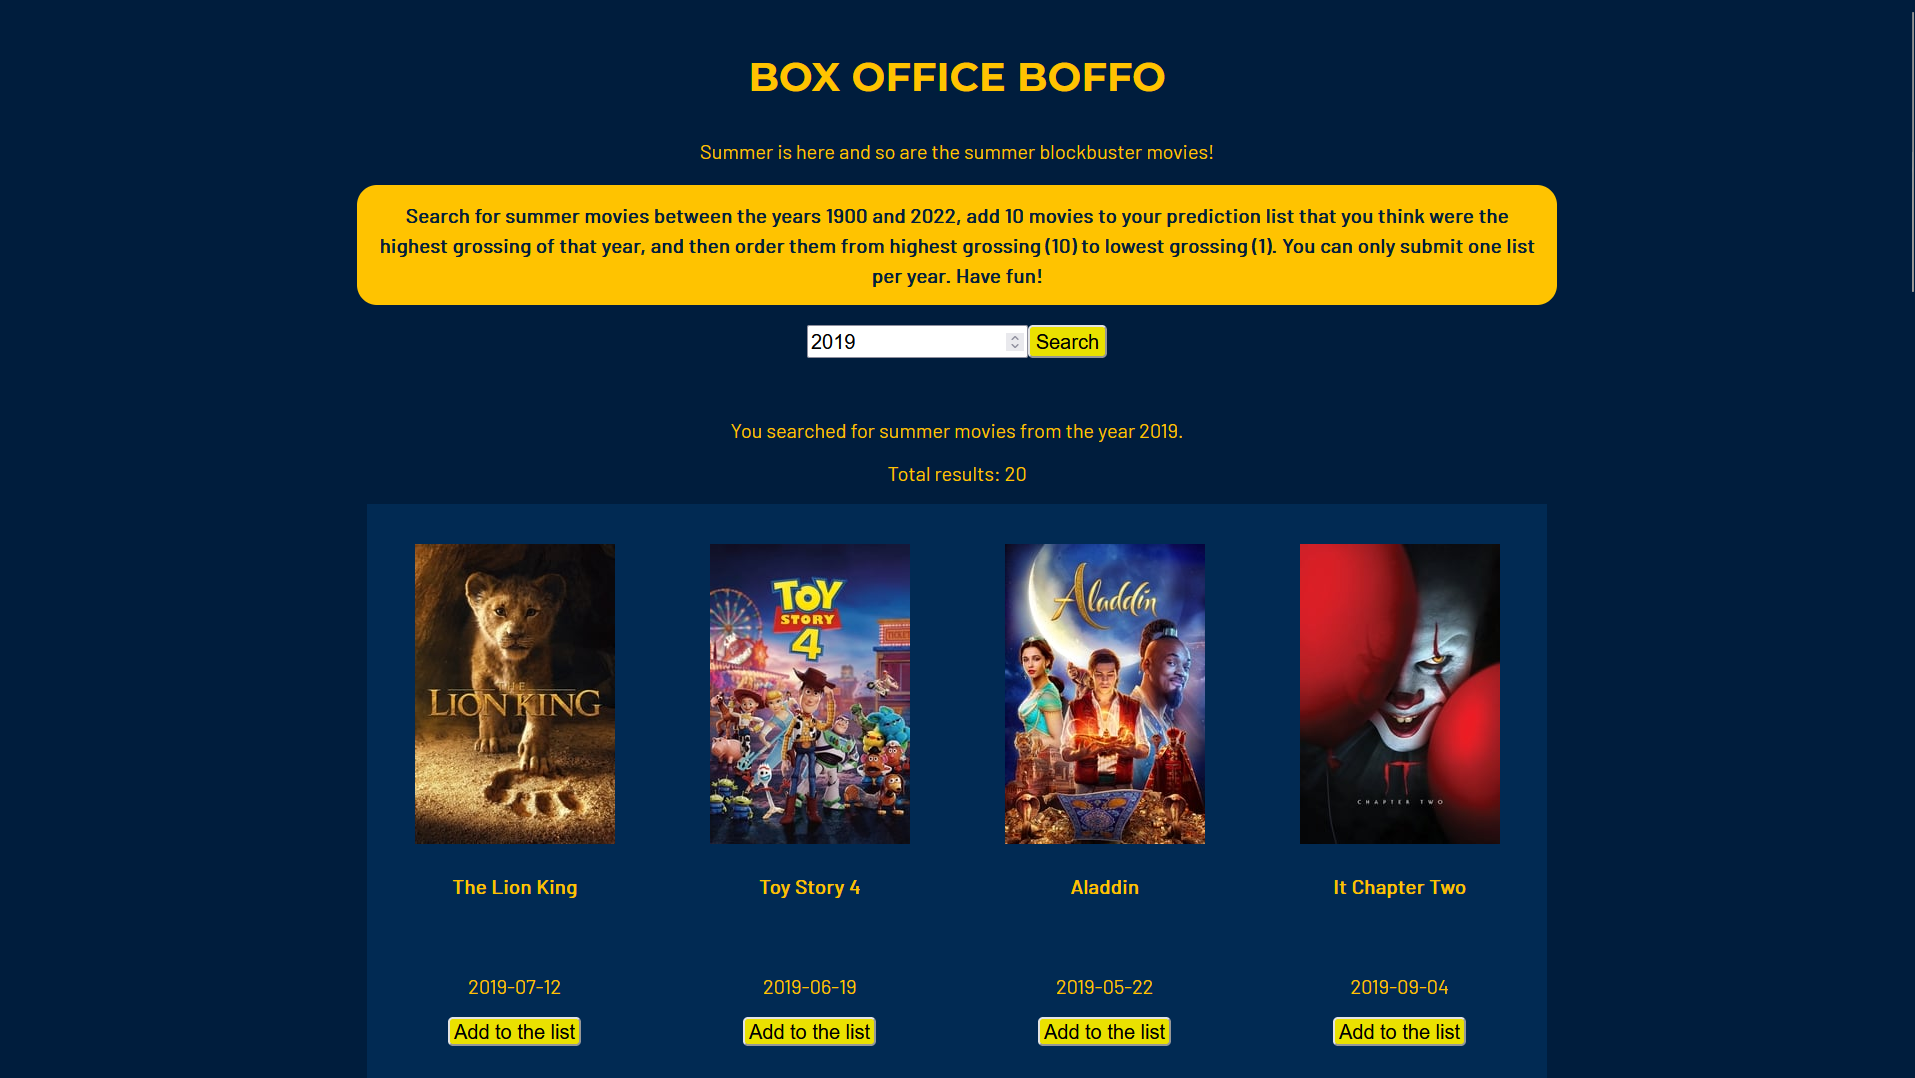 Landing page for Box Office Boffo